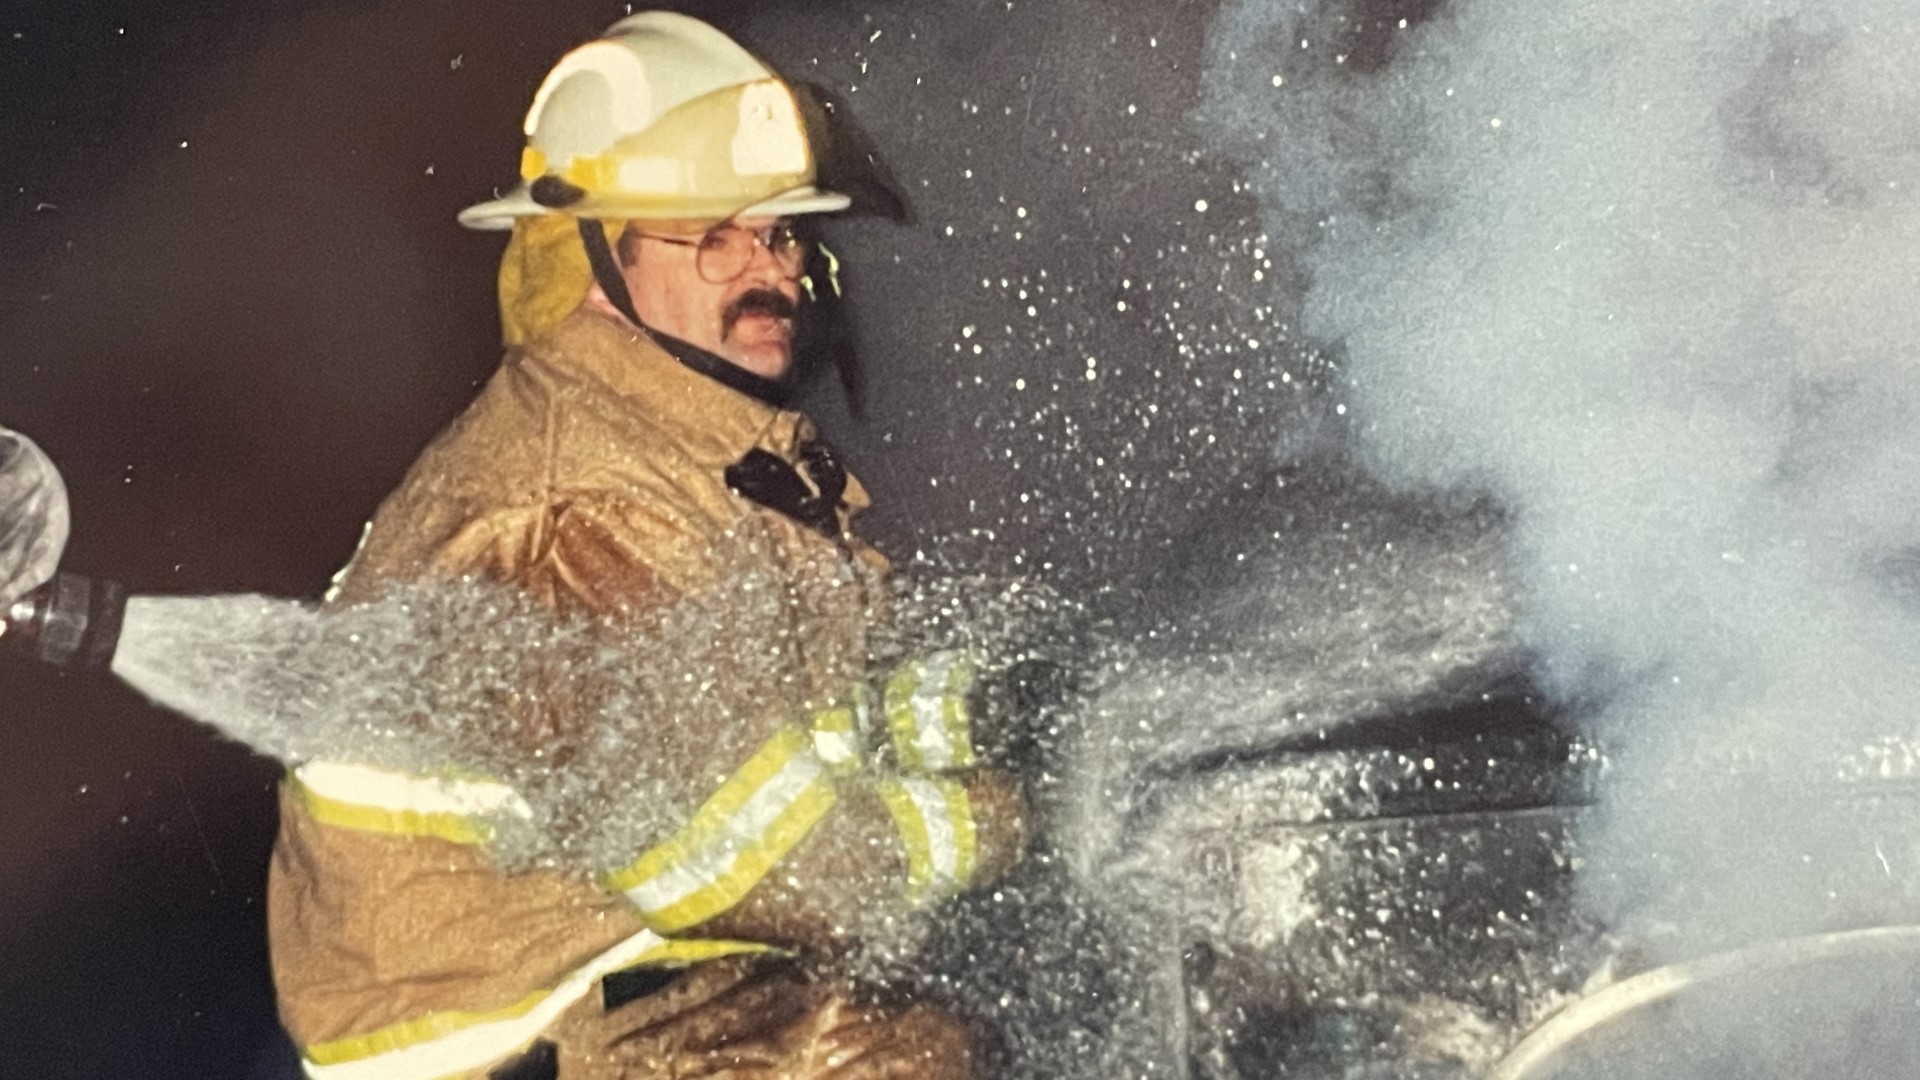 Jeff Wright was a staple at the West Point Fire Department for over 40 years. His department remembers his life not only as a former chief, but as a friend.